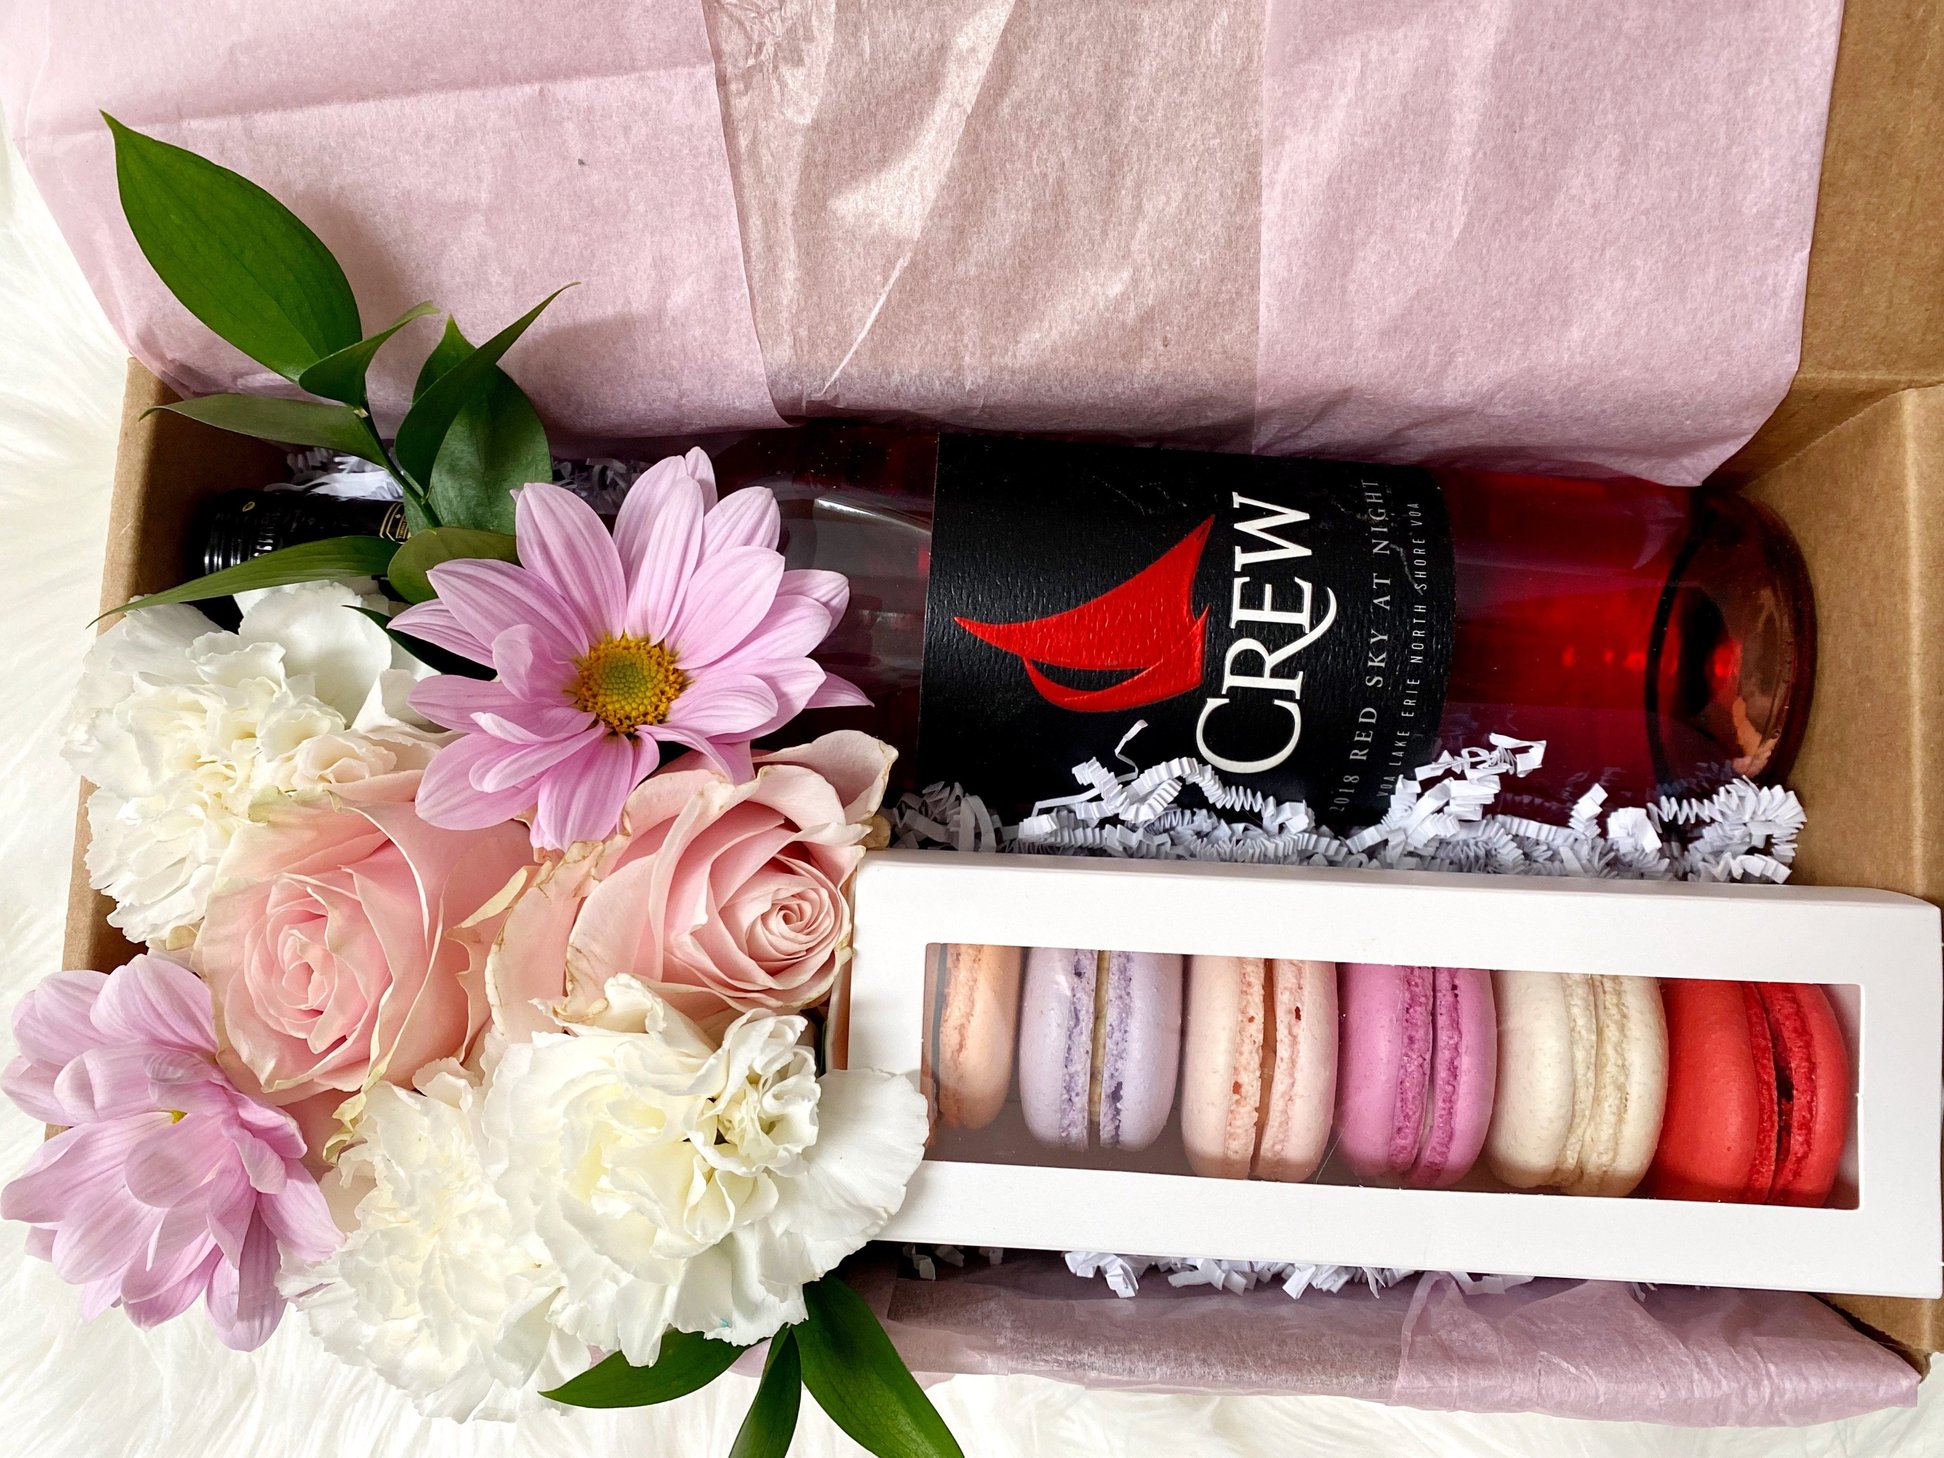 French Macarons bundled with a floral composition and an Ontario-made beverage.